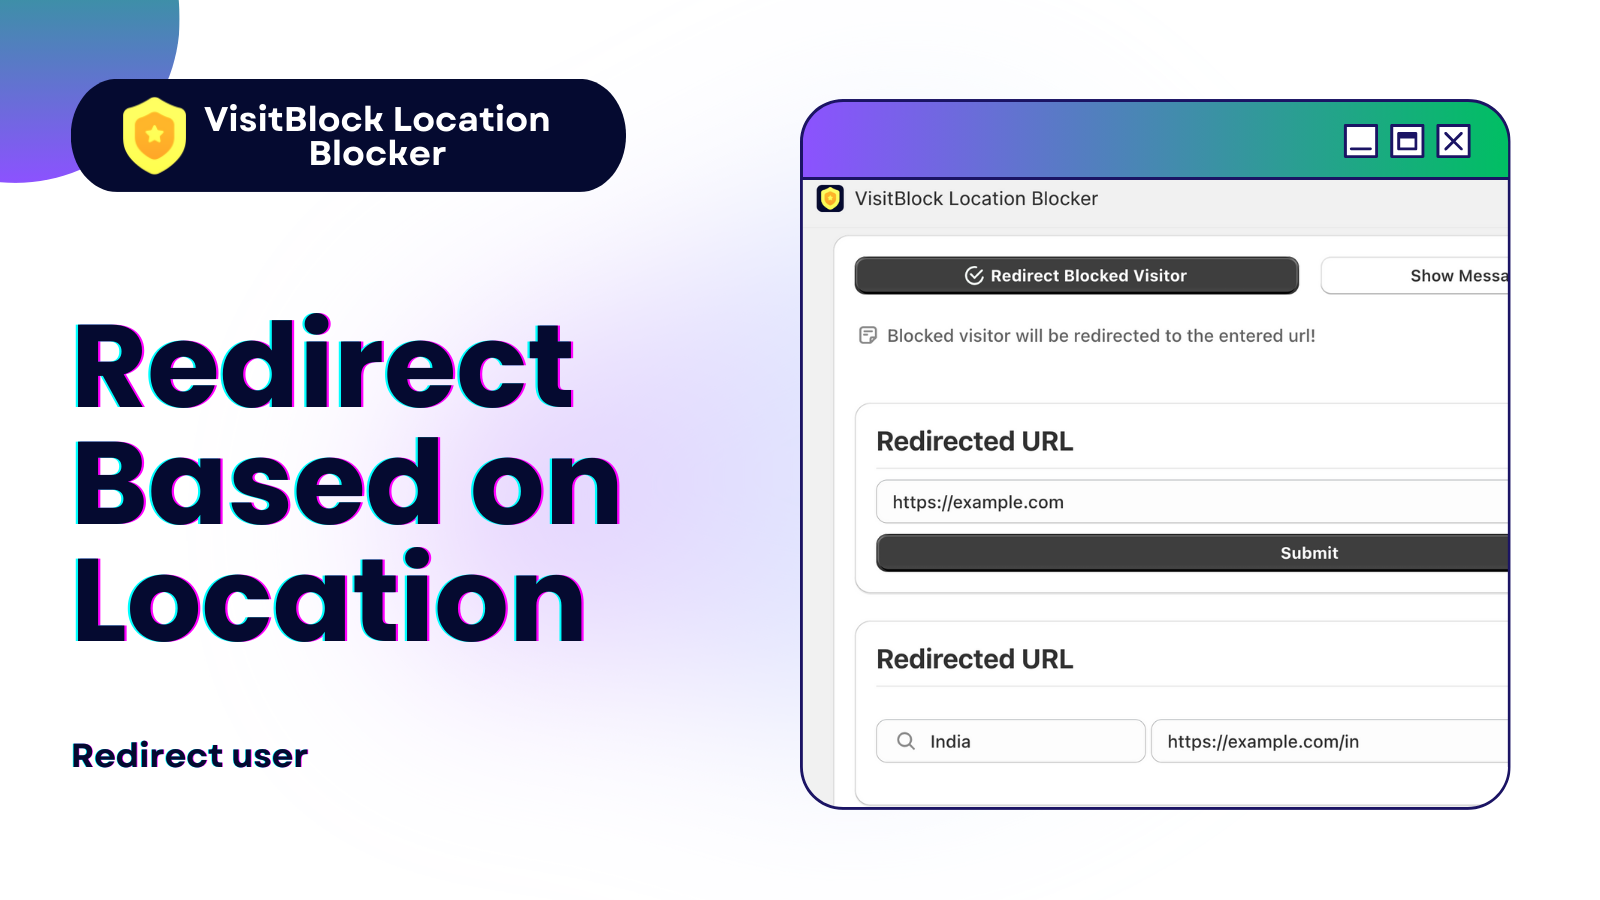 You can also redirect the user to any other url using VisitBlock